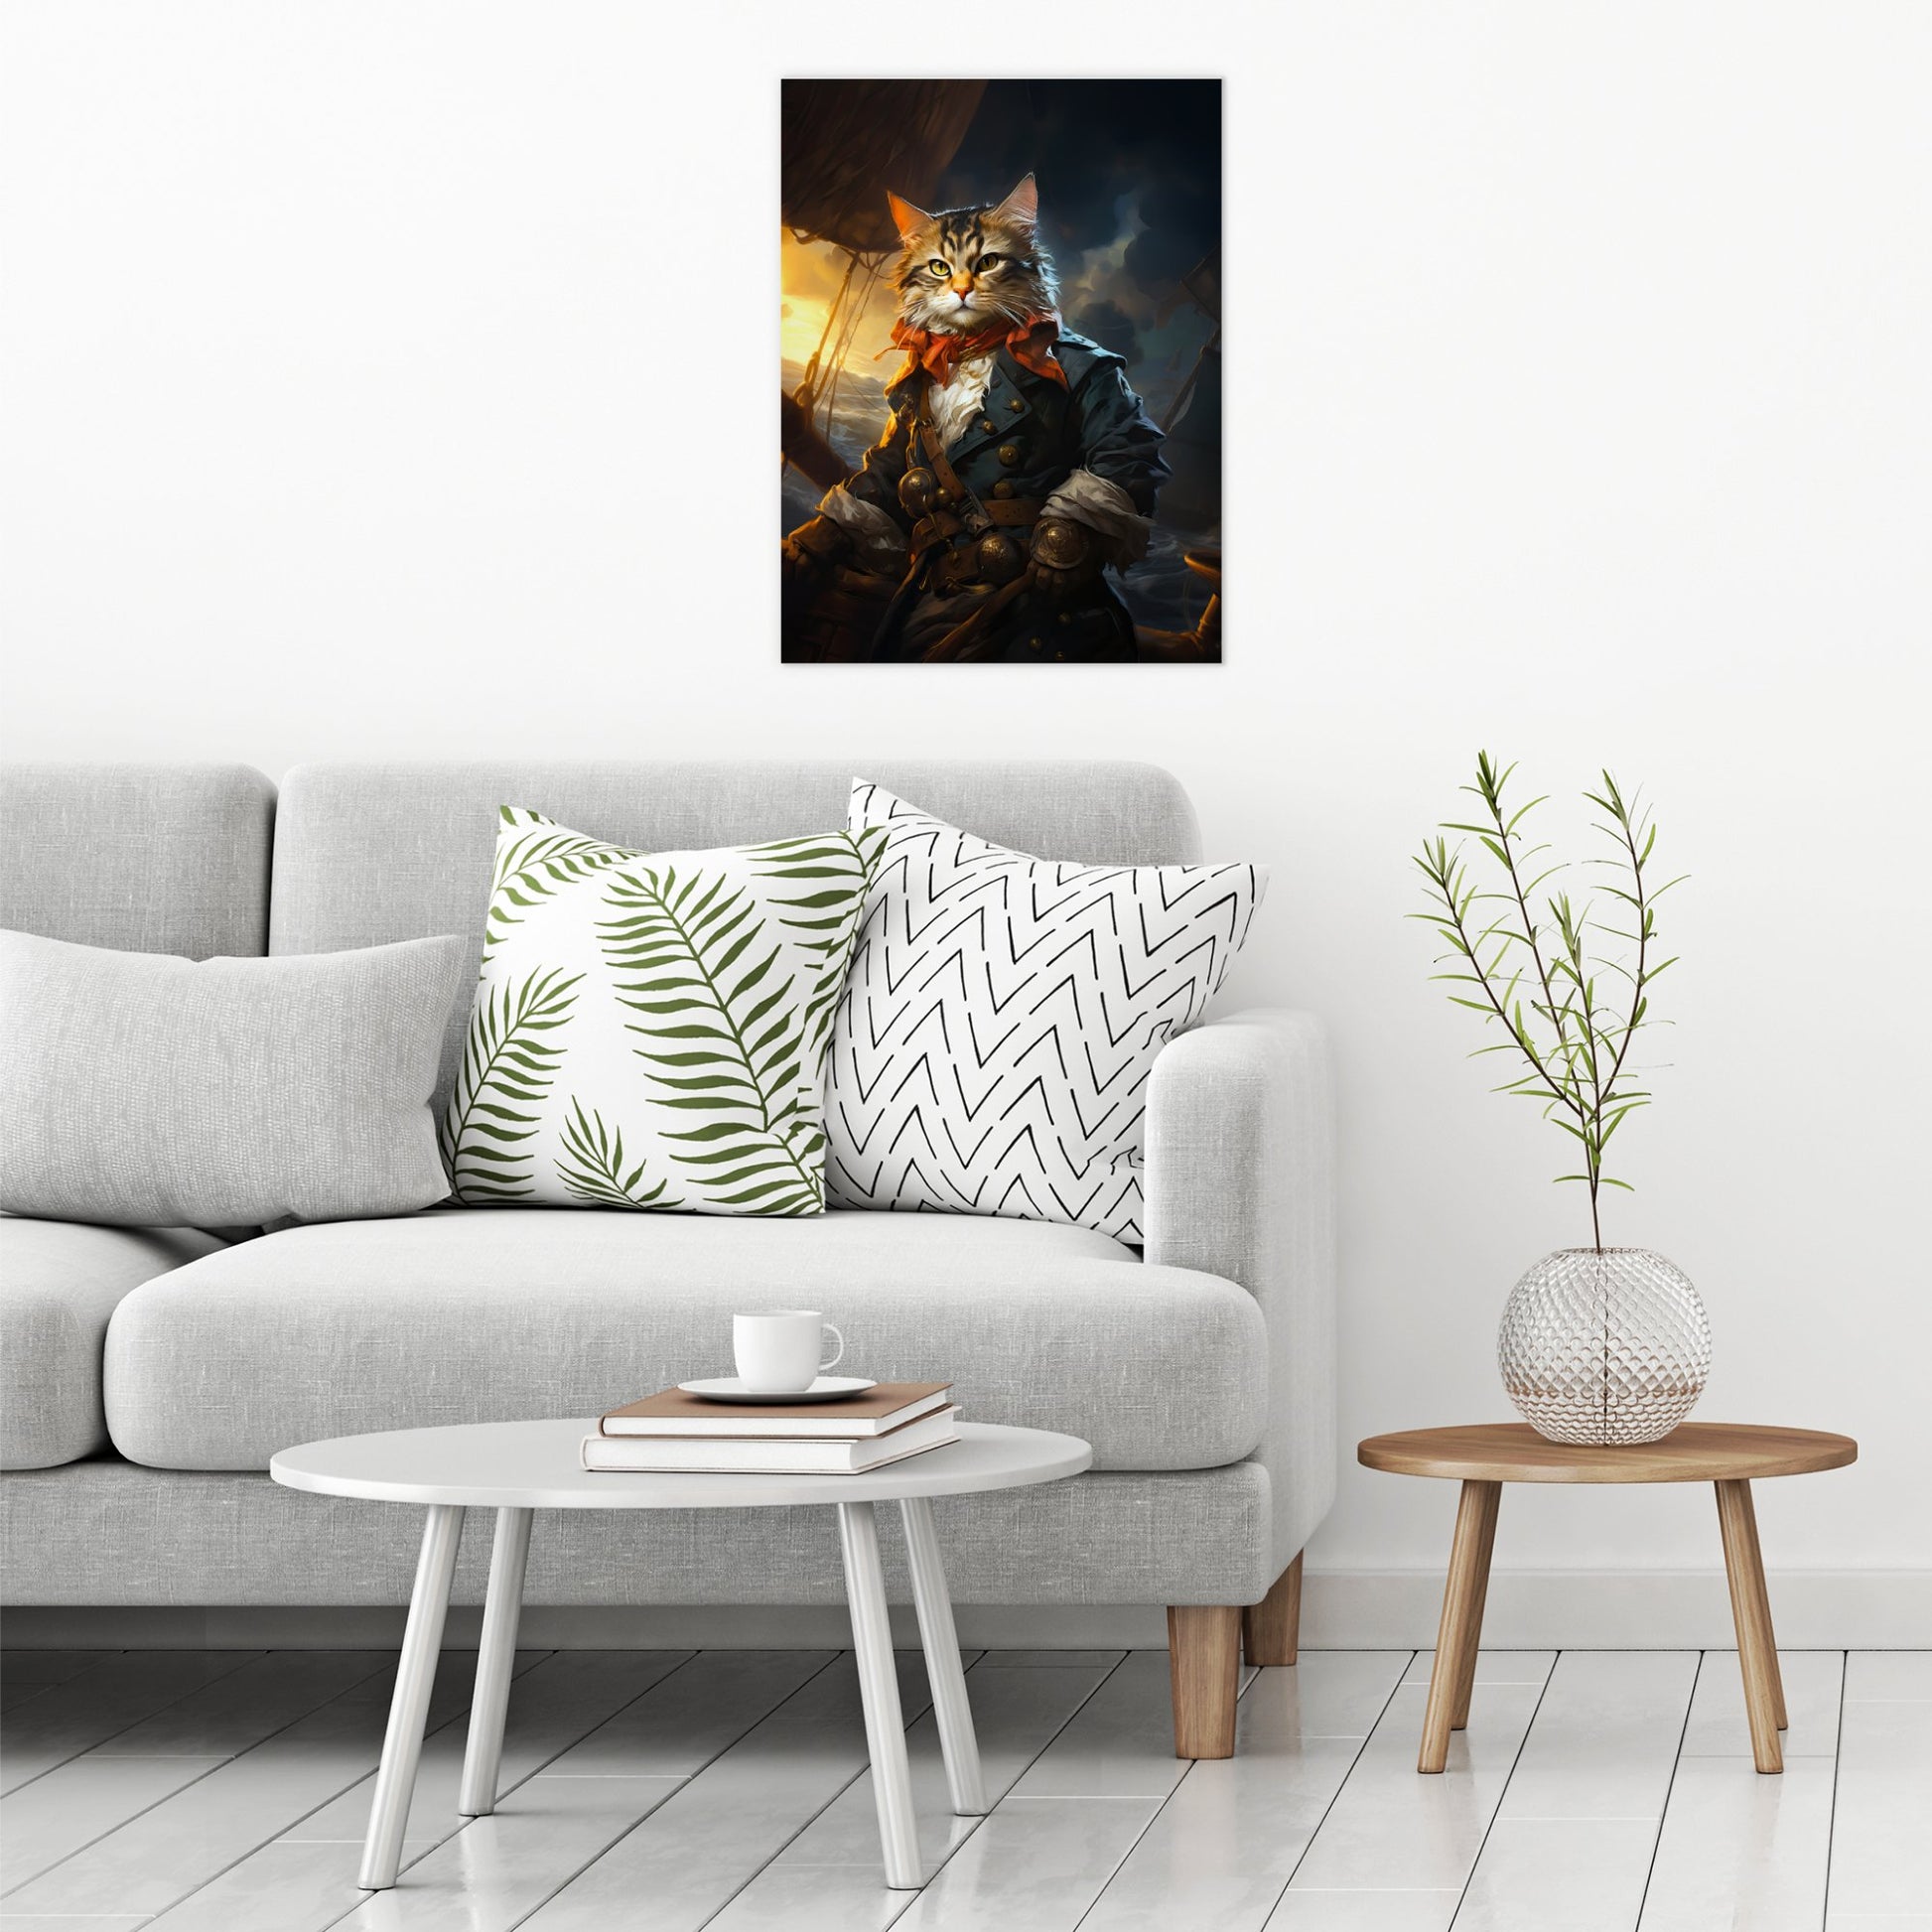 A contemporary modern room view showing a large size metal art poster display plate with printed design of a Pet Portraits - Pirate Cat Painting